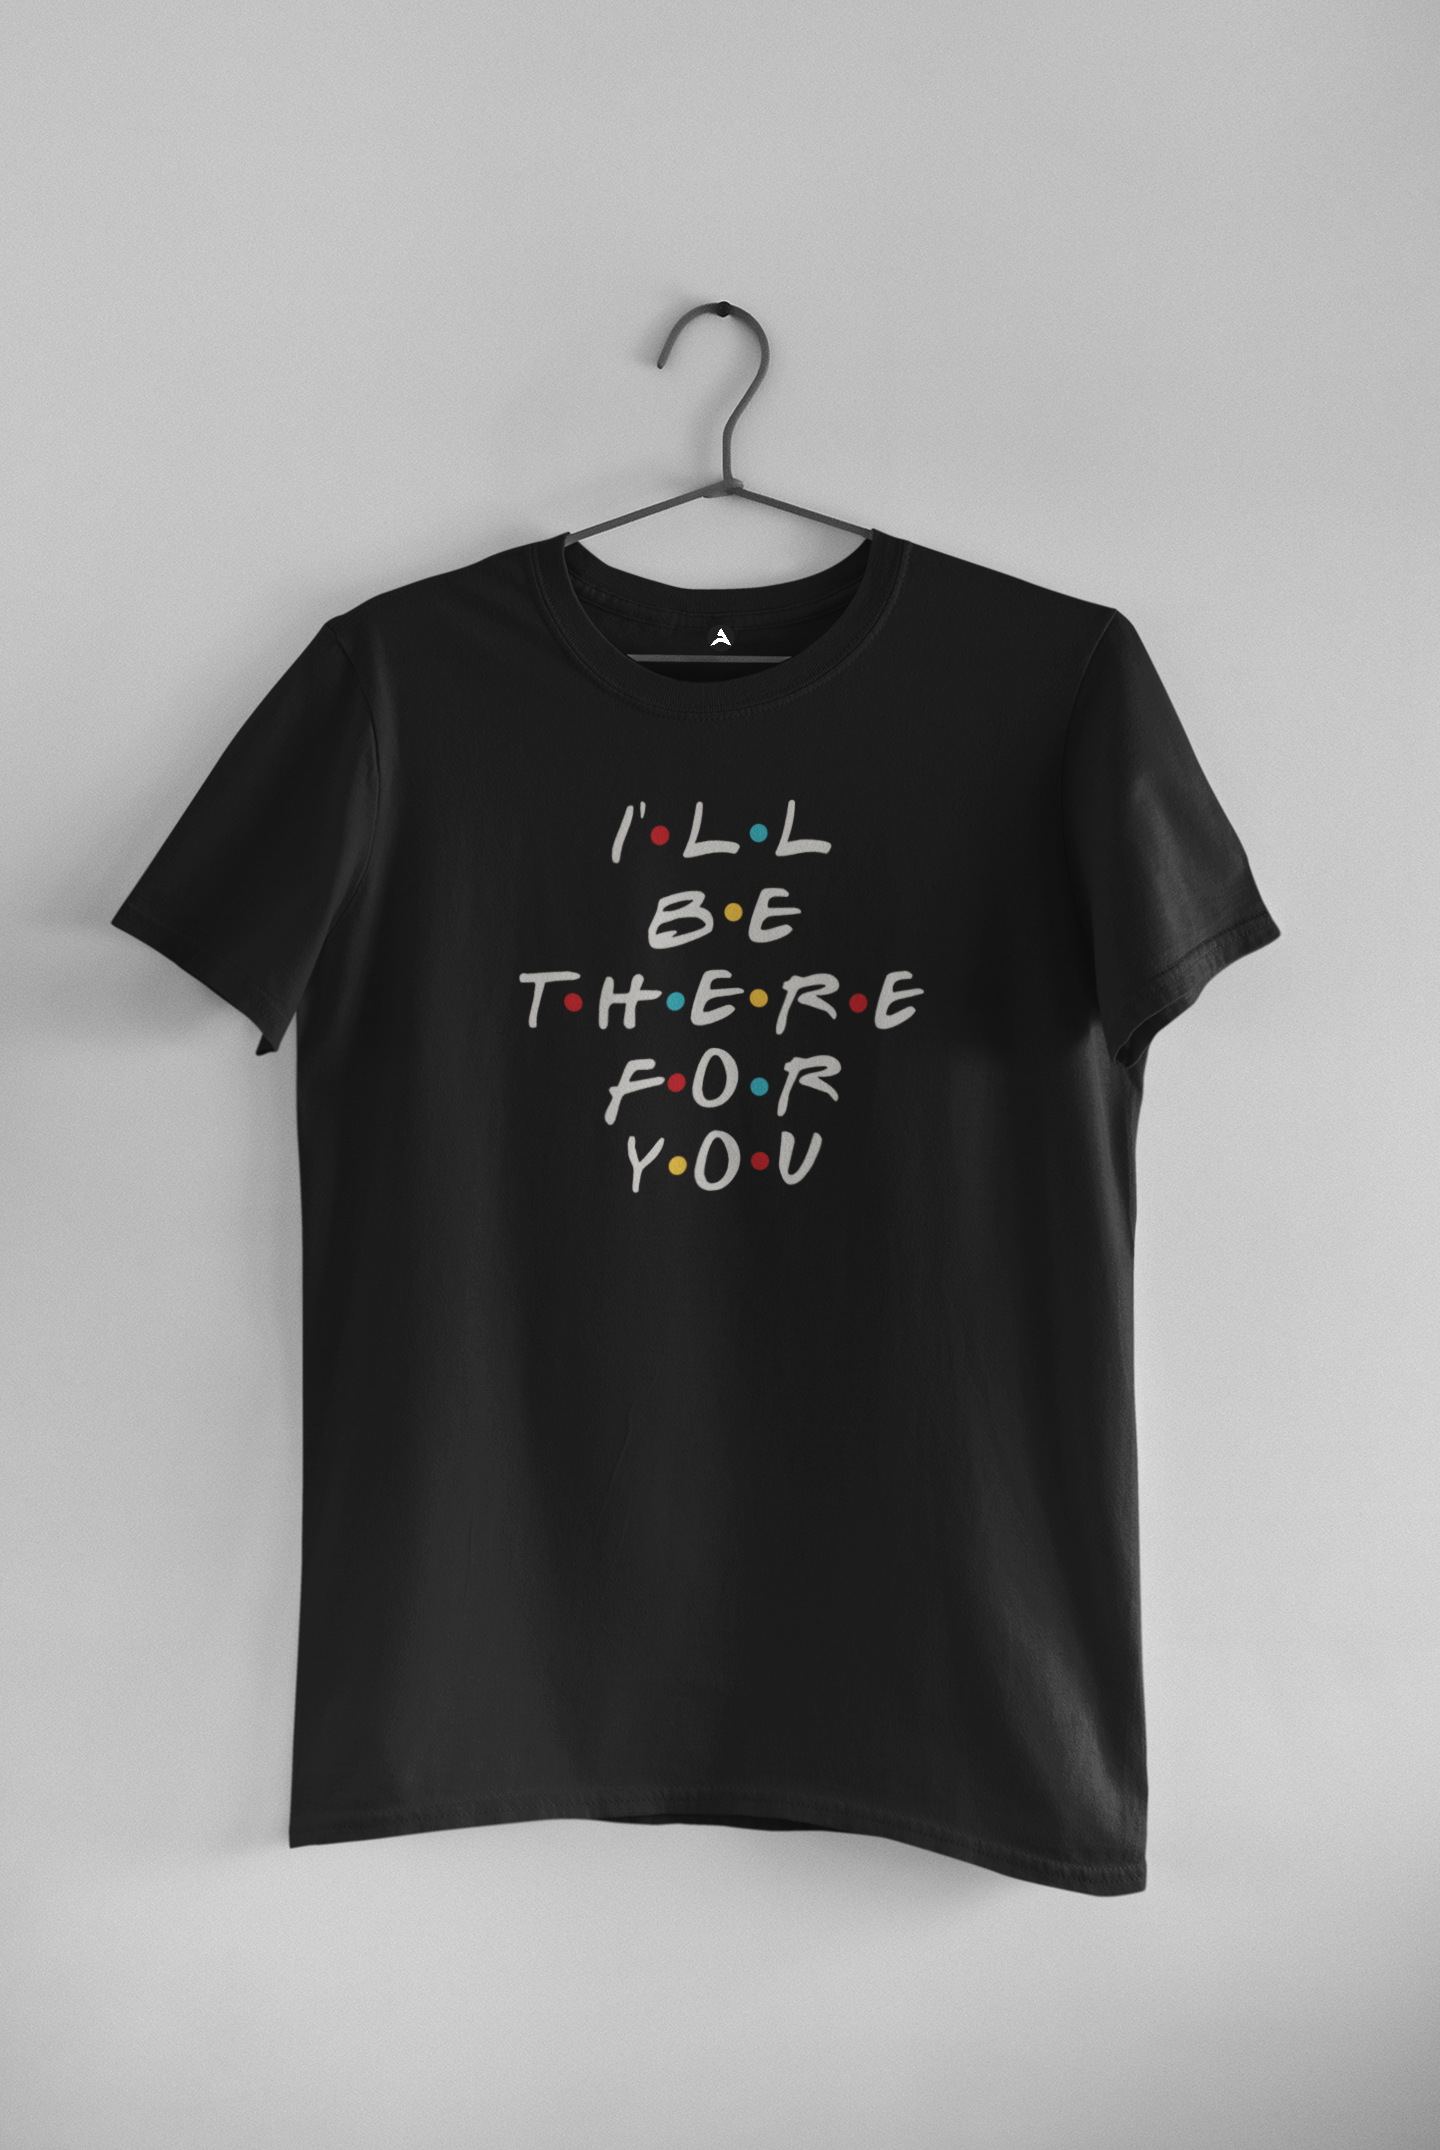 I LL Be There For You: FRIENDS - HALF-SLEEVE T-SHIRT BLACK